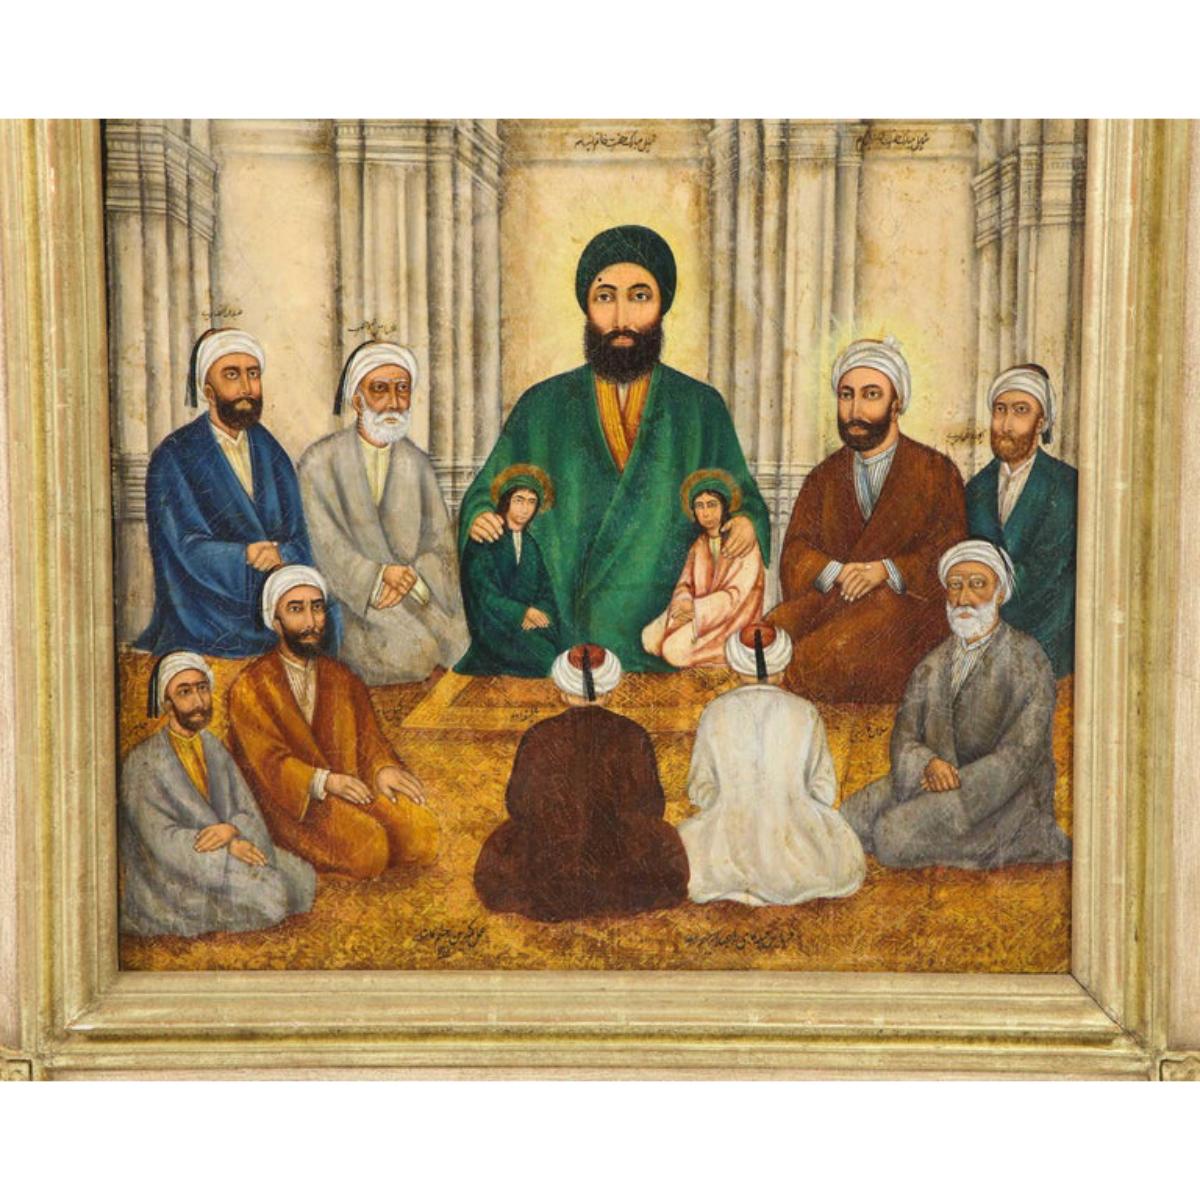 An extremely fine and rare Islamic Qajar dynasty portrait oil on canvas painting of Prophet Mohammad, signed and dated, 1883.  

This rare, historic, Persian painting captures fine painted portraits of Prophet Mohammad, his son in law Ali, his two